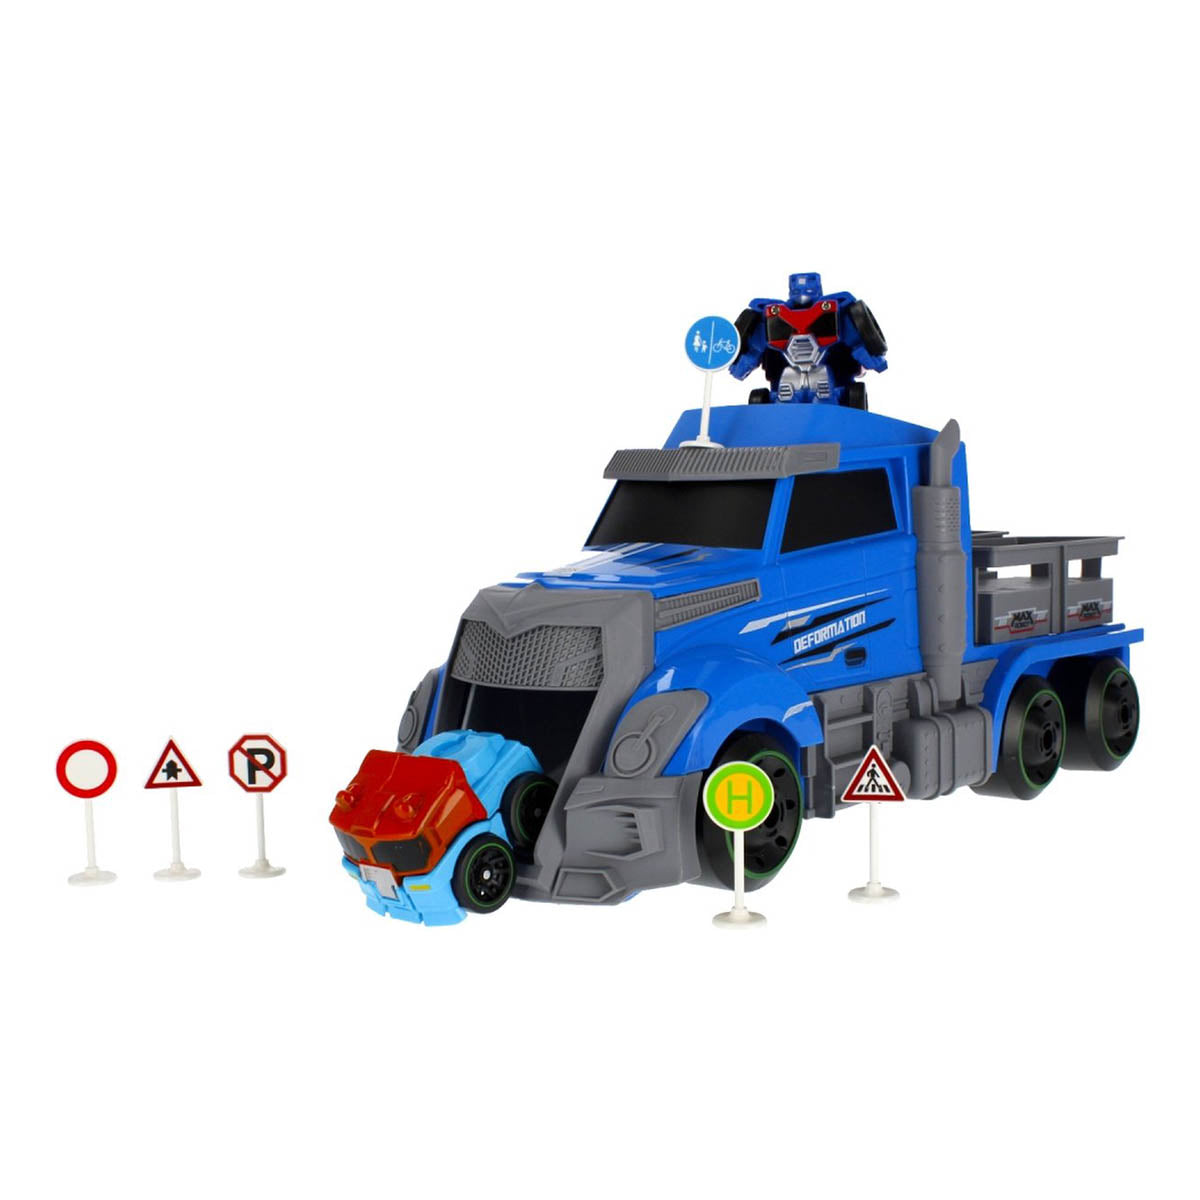 <tc>Ariko</tc> Truck launcher with 2 robot cars - including traffic signs